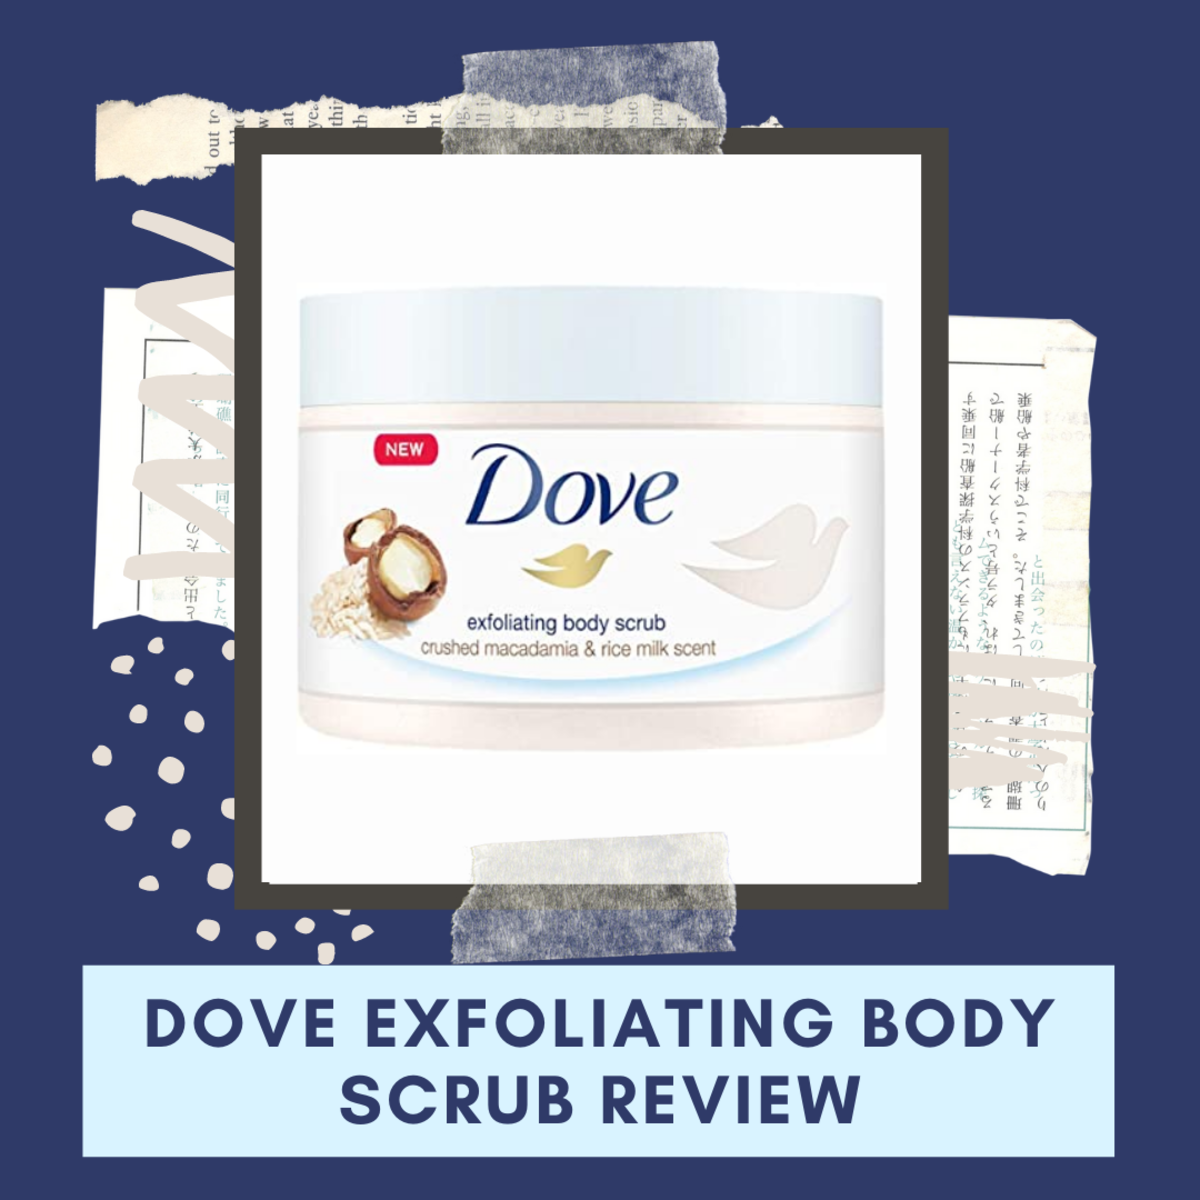 A review of Dove's exfoliating body scrub (crushed macadamia & rice milk scent)